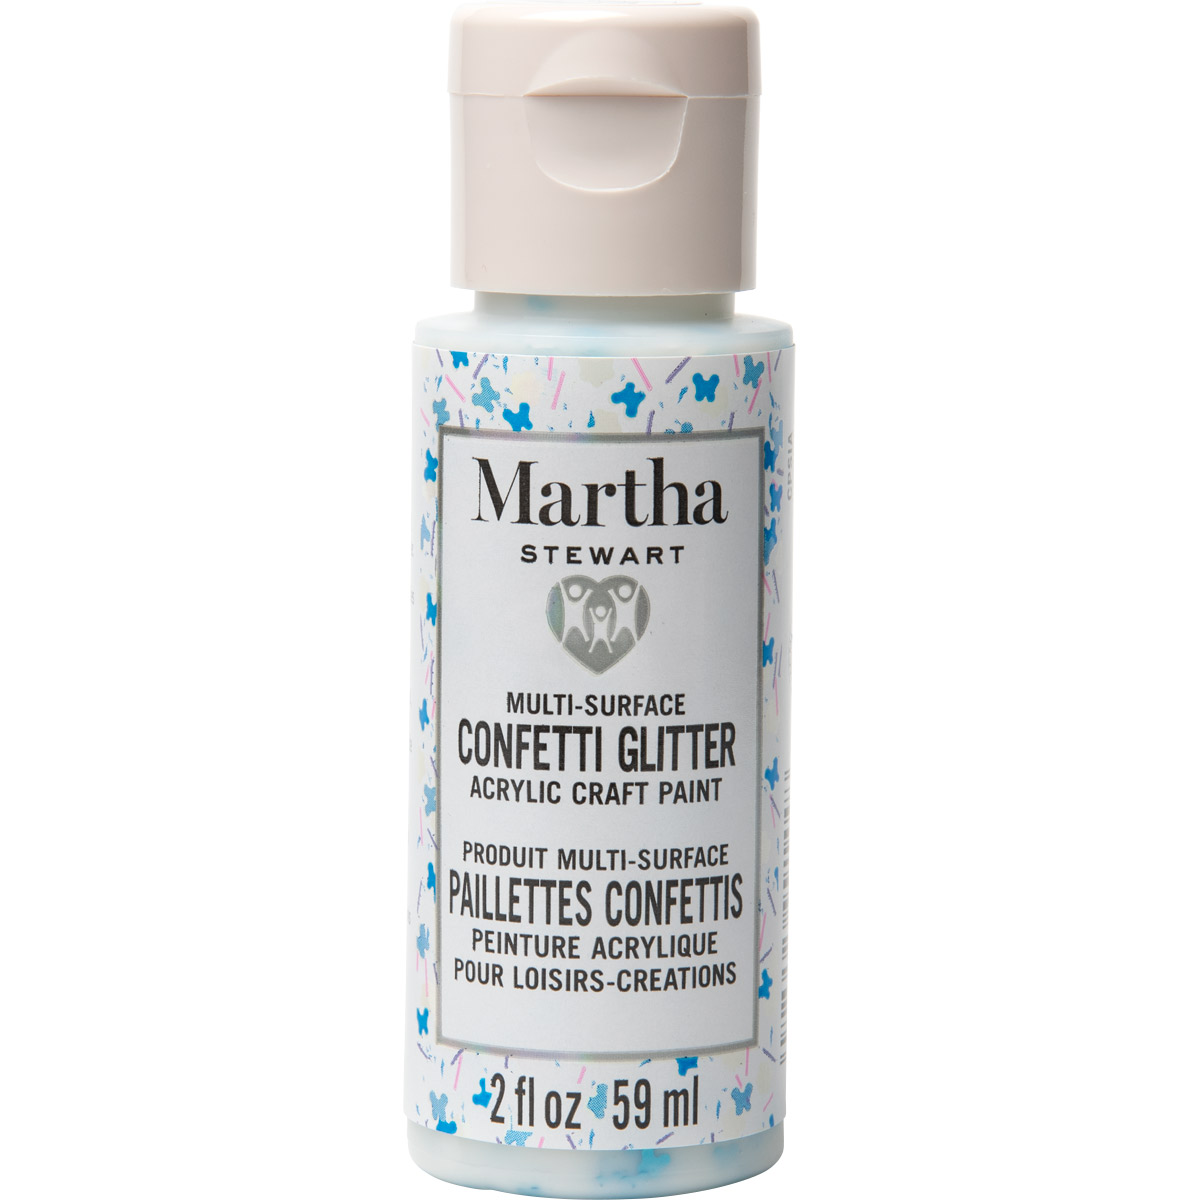 Martha Stewart ® Multi-Surface Confetti Glitter Acrylic Craft Paint CPSIA - Butterfly Party, 2 oz. -